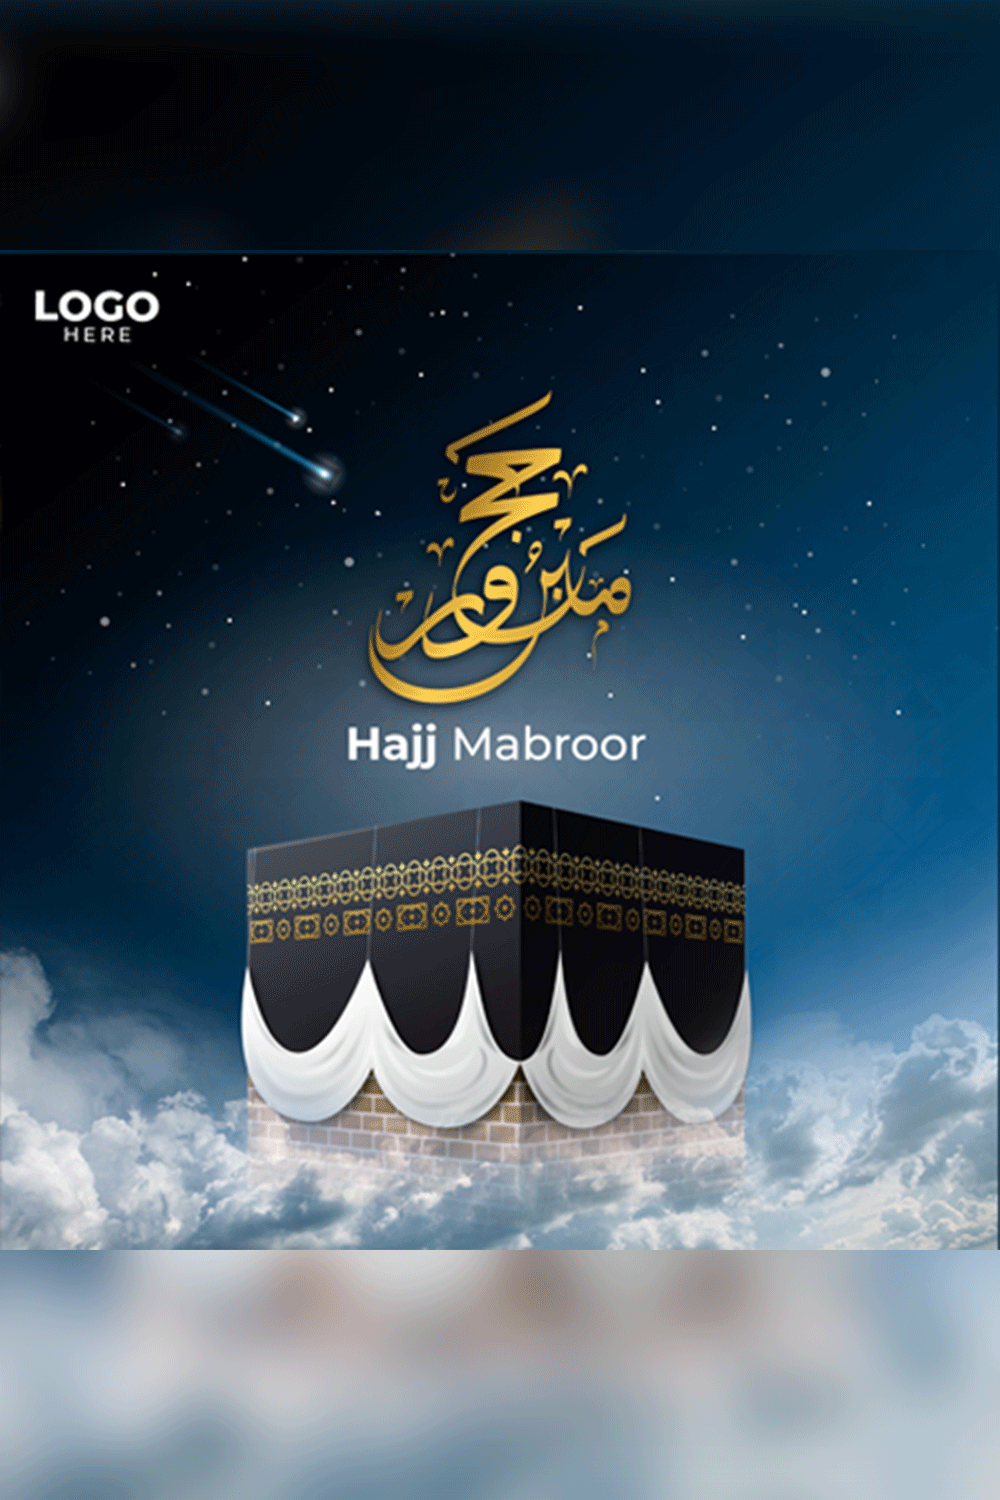 hajj mabrour greeting card islamic floral pattern vector design with kaaba and arabic calligraphy pinterest preview image.